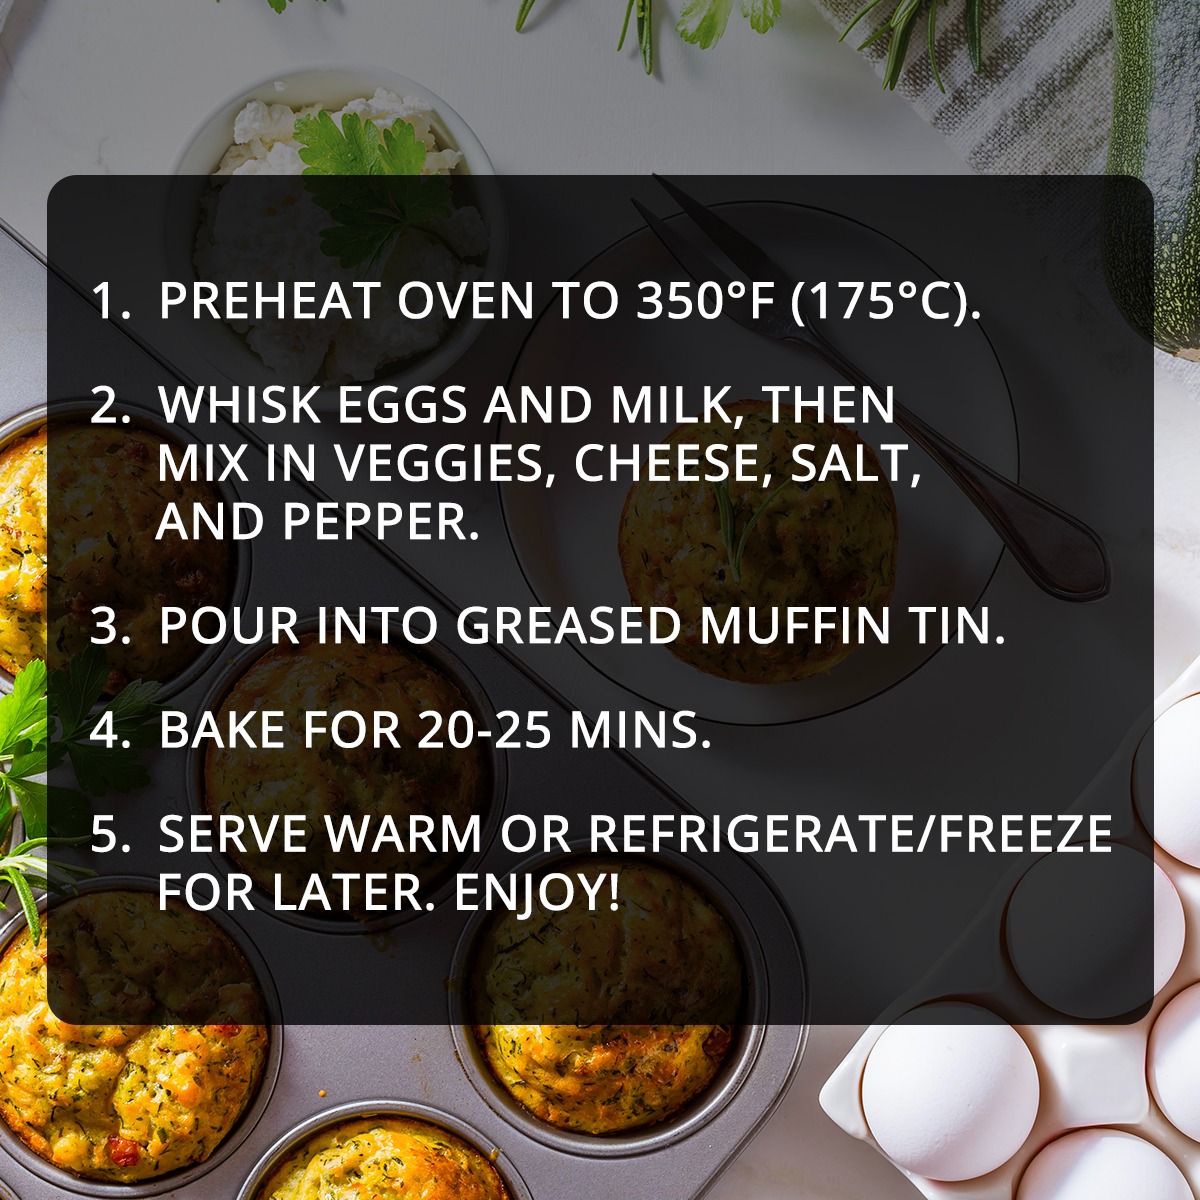 Egg muffins: the ultimate grab-and-go breakfast! Whip up a batch in just a few easy steps. Perfect for a leisurely weekend morning or a quick weekday meal prep. Try them now and start your day on a delicious note!

#MorningMunch #Breakfast #BreakfastRecipes #EggMuffins #ZeeZest